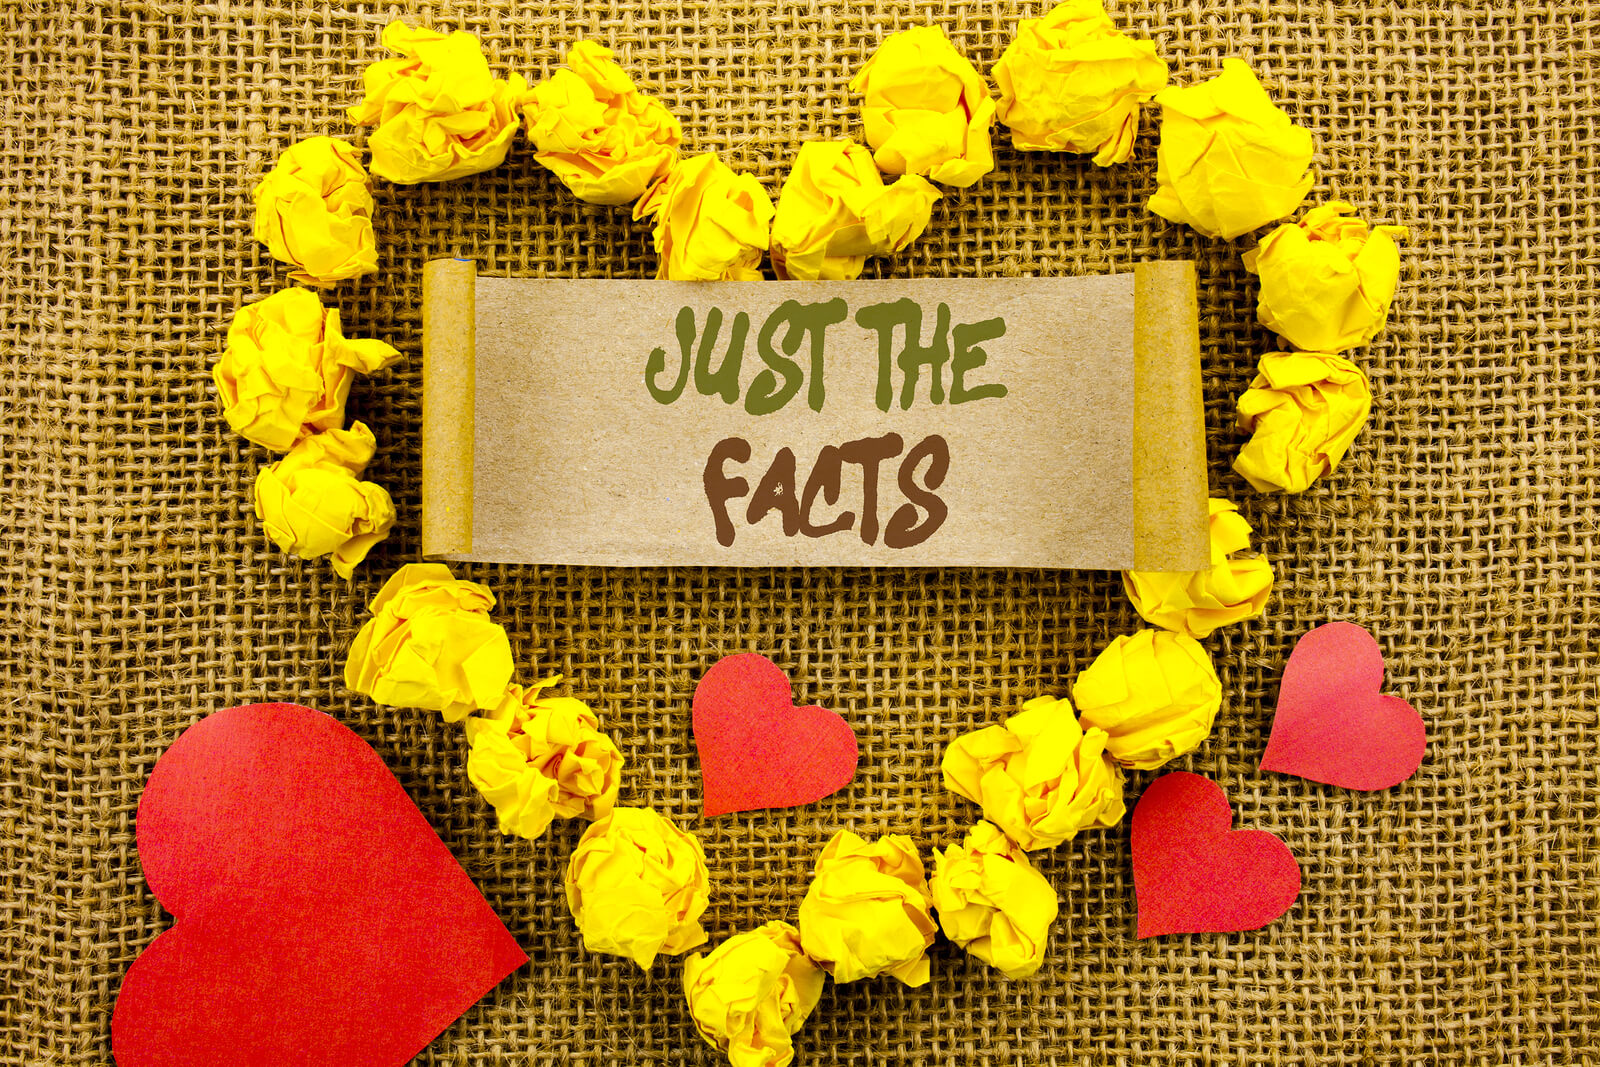 red hearts with a bigger yellow crumbled up paper shaped in a heart with the words just the facts in the center